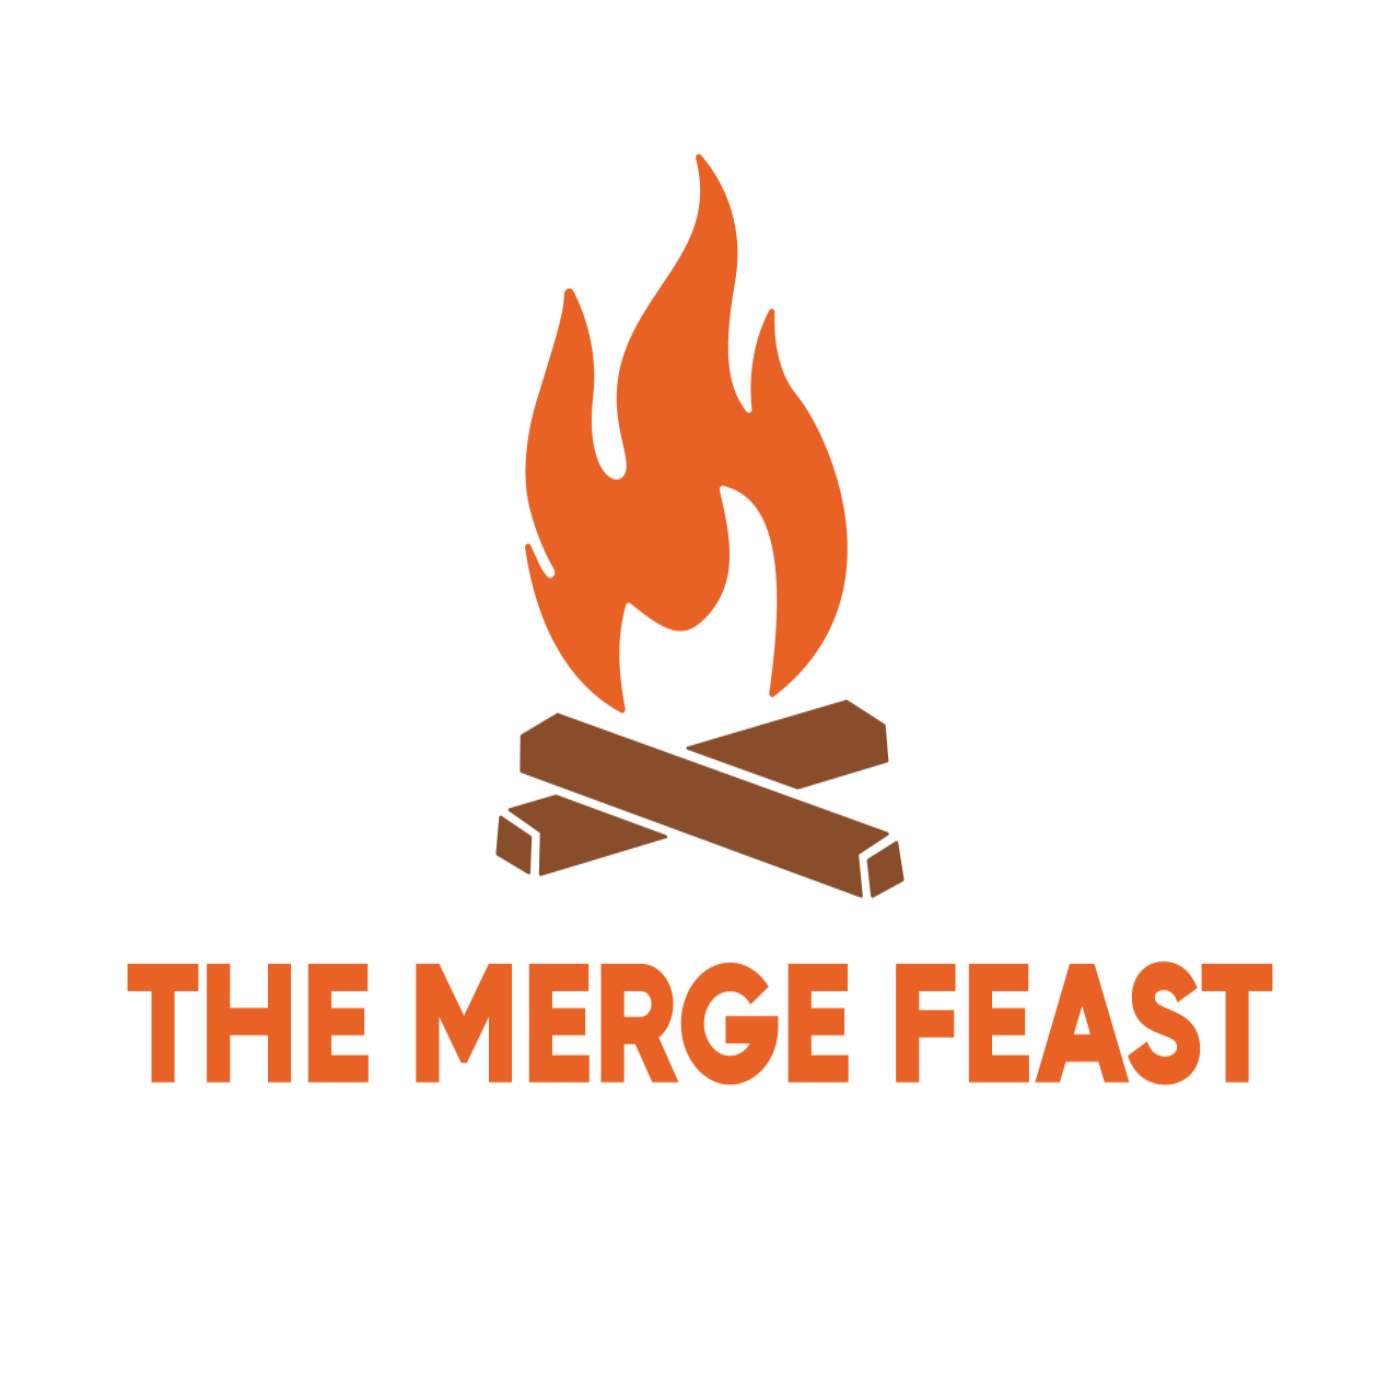 Artwork for The Merge Feast